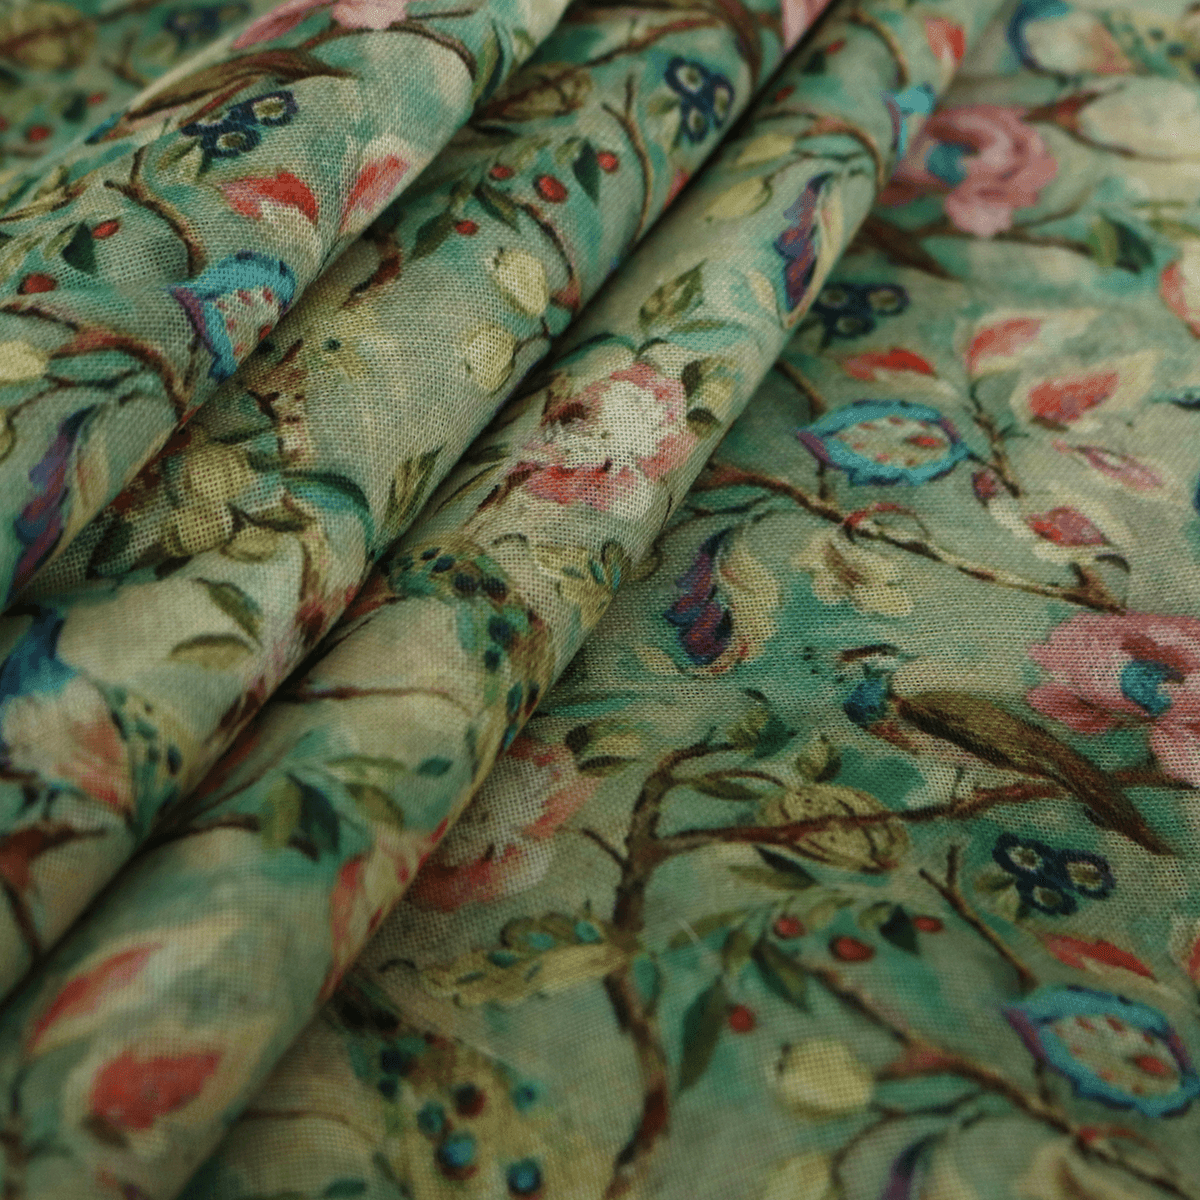 Rainbow Peacock With Autumnal Leaves Digital Printed Fabric - Linen - FAB VOGUE Studio®